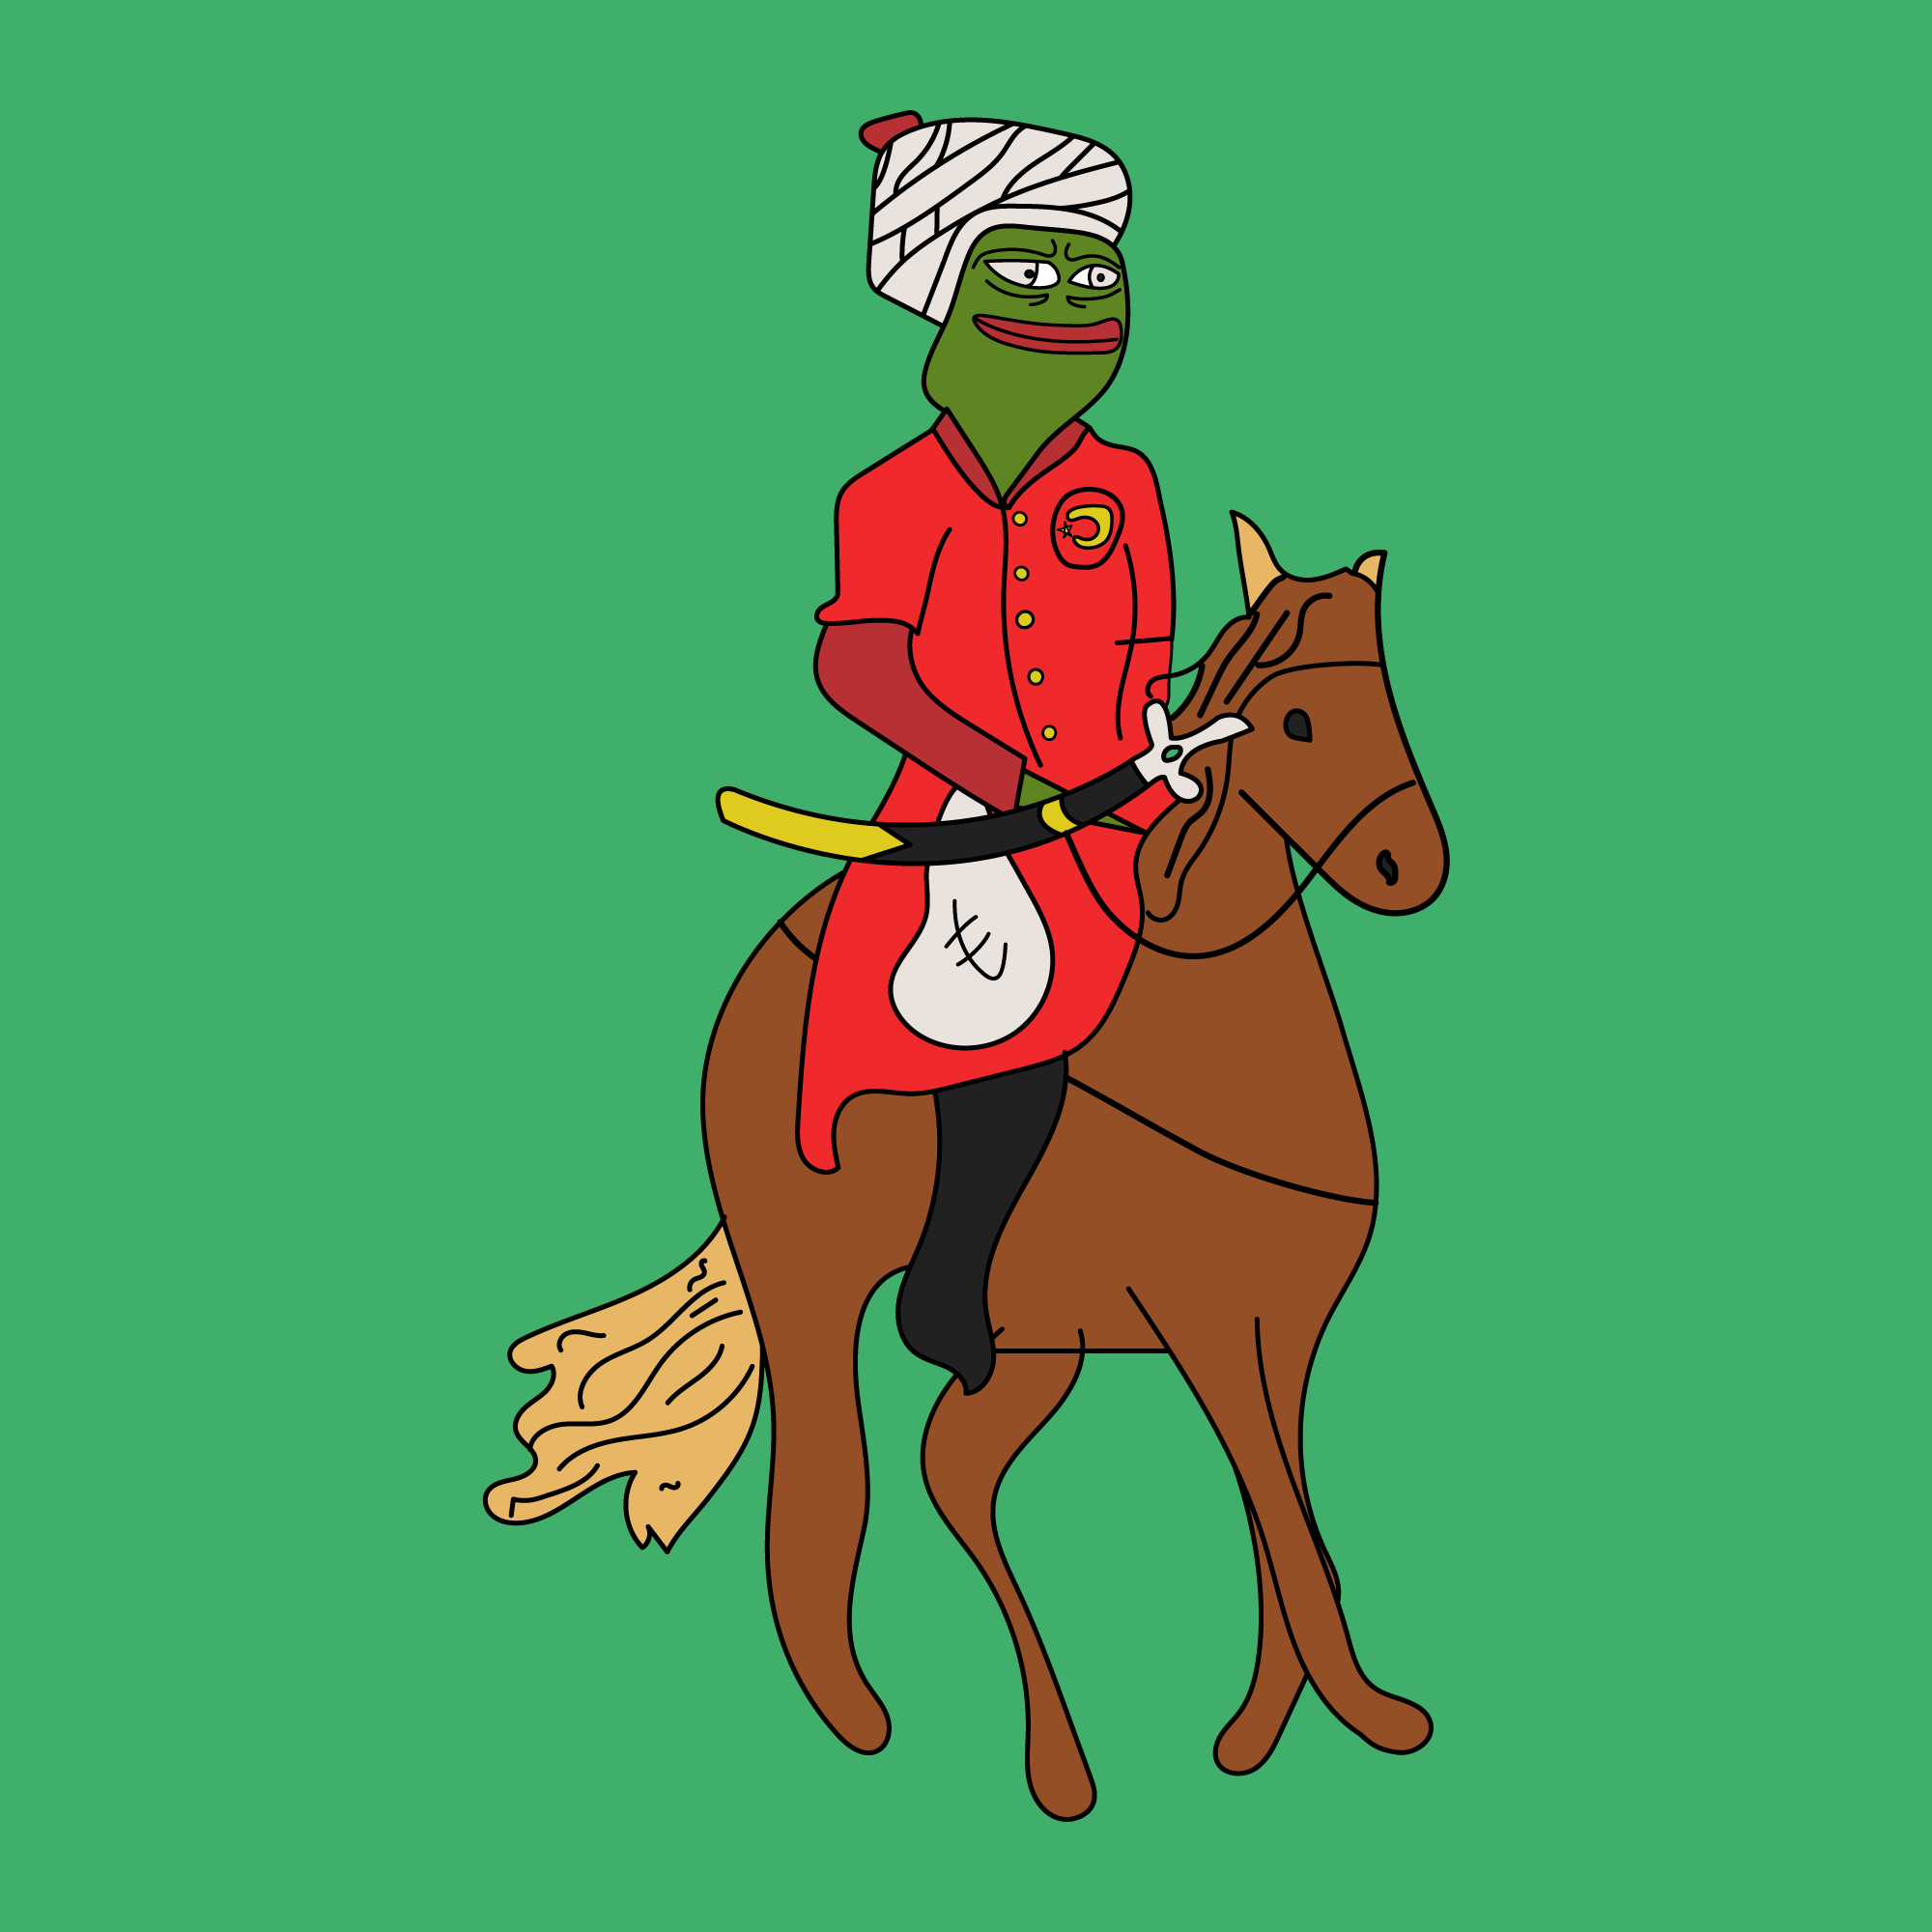 Ottoman Turkish frog Rider preview image.